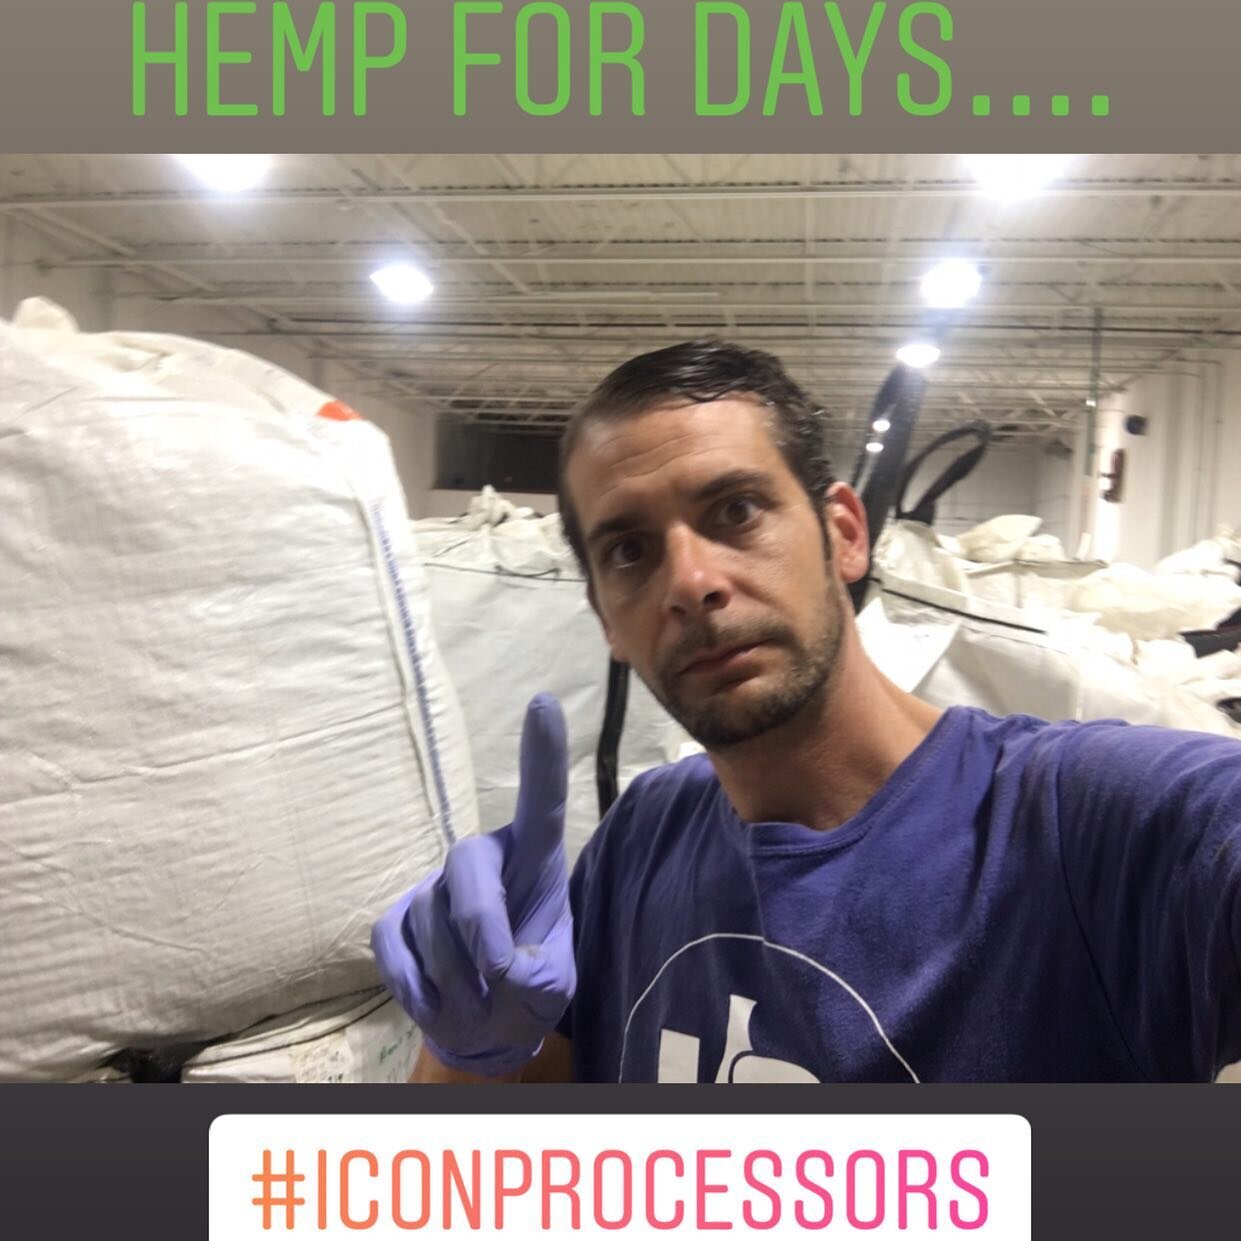 When your good at what you do your expected to set standers for the industry to fallow. #icon #hemp #cbdproducts #distillate #cbd #healthyliving #lovelife #betterliving #onelove